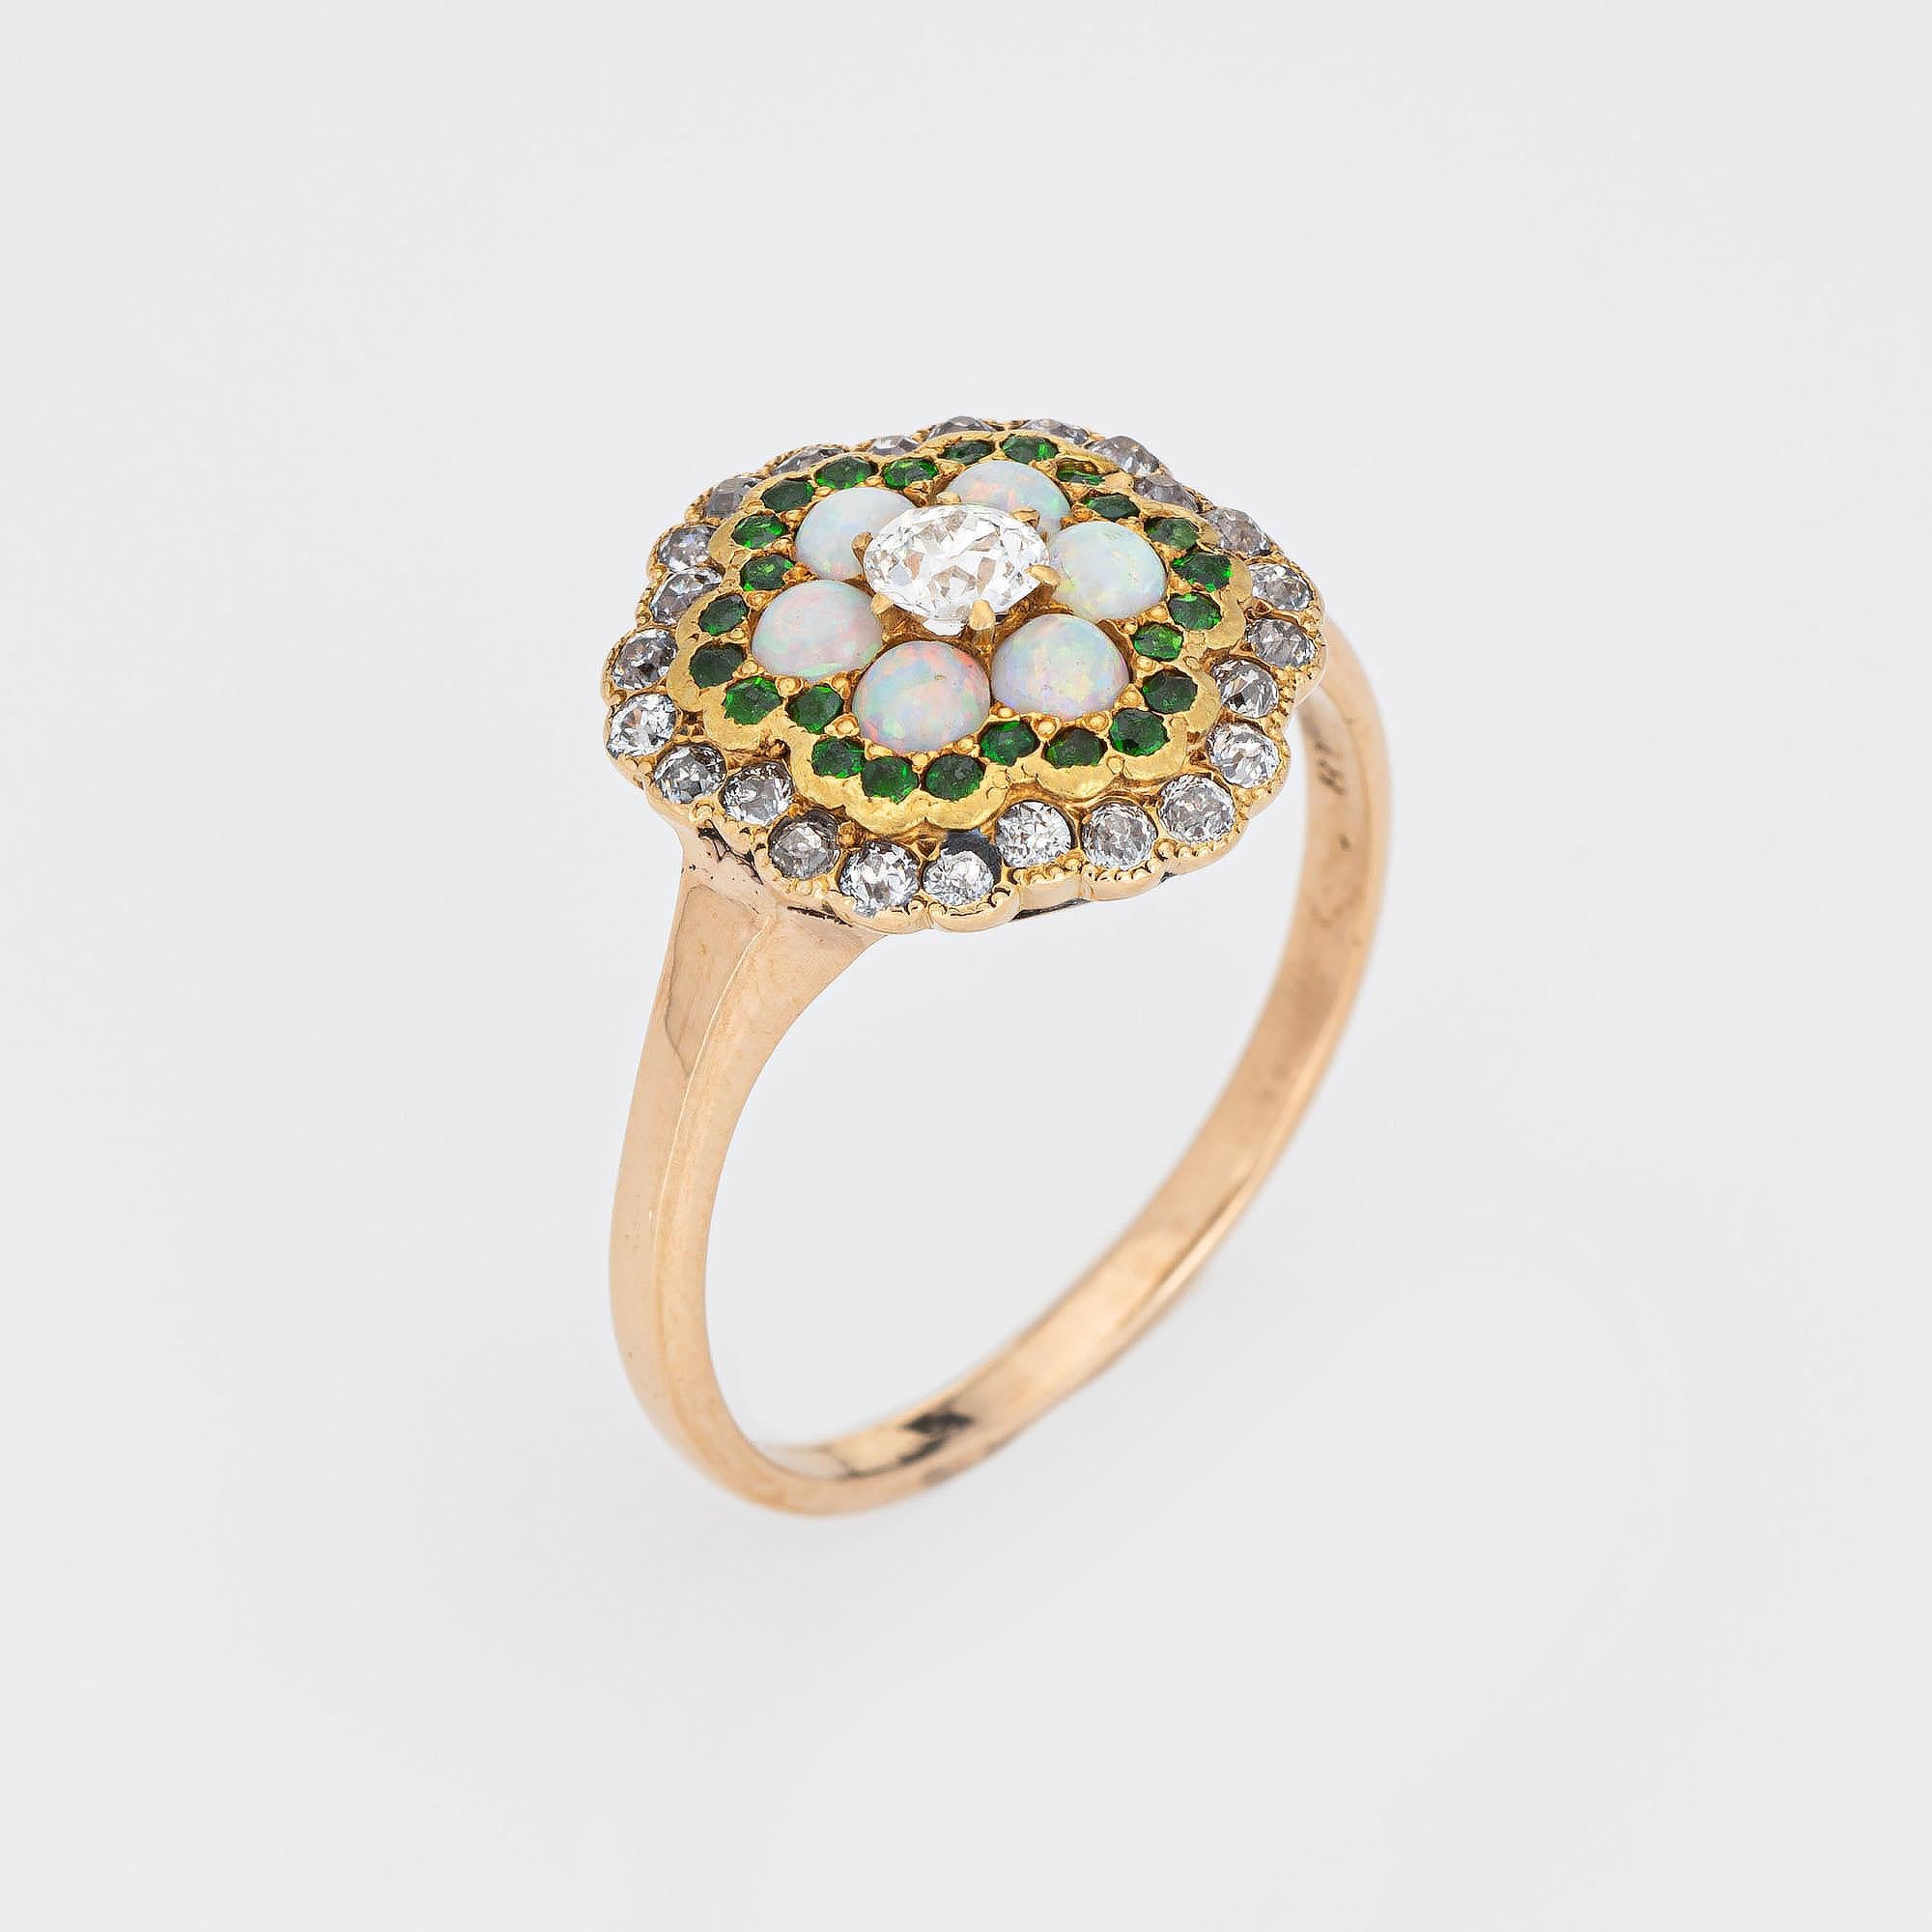 Finely detailed antique Edwardian opal, diamond & demantoid garnet cluster ring crafted in 18k white gold (circa 1910s to 1920s).  

One center set old mine cut diamond is estimated at 0.20 carats, accented with a further 24 estimated 0.02 carat old